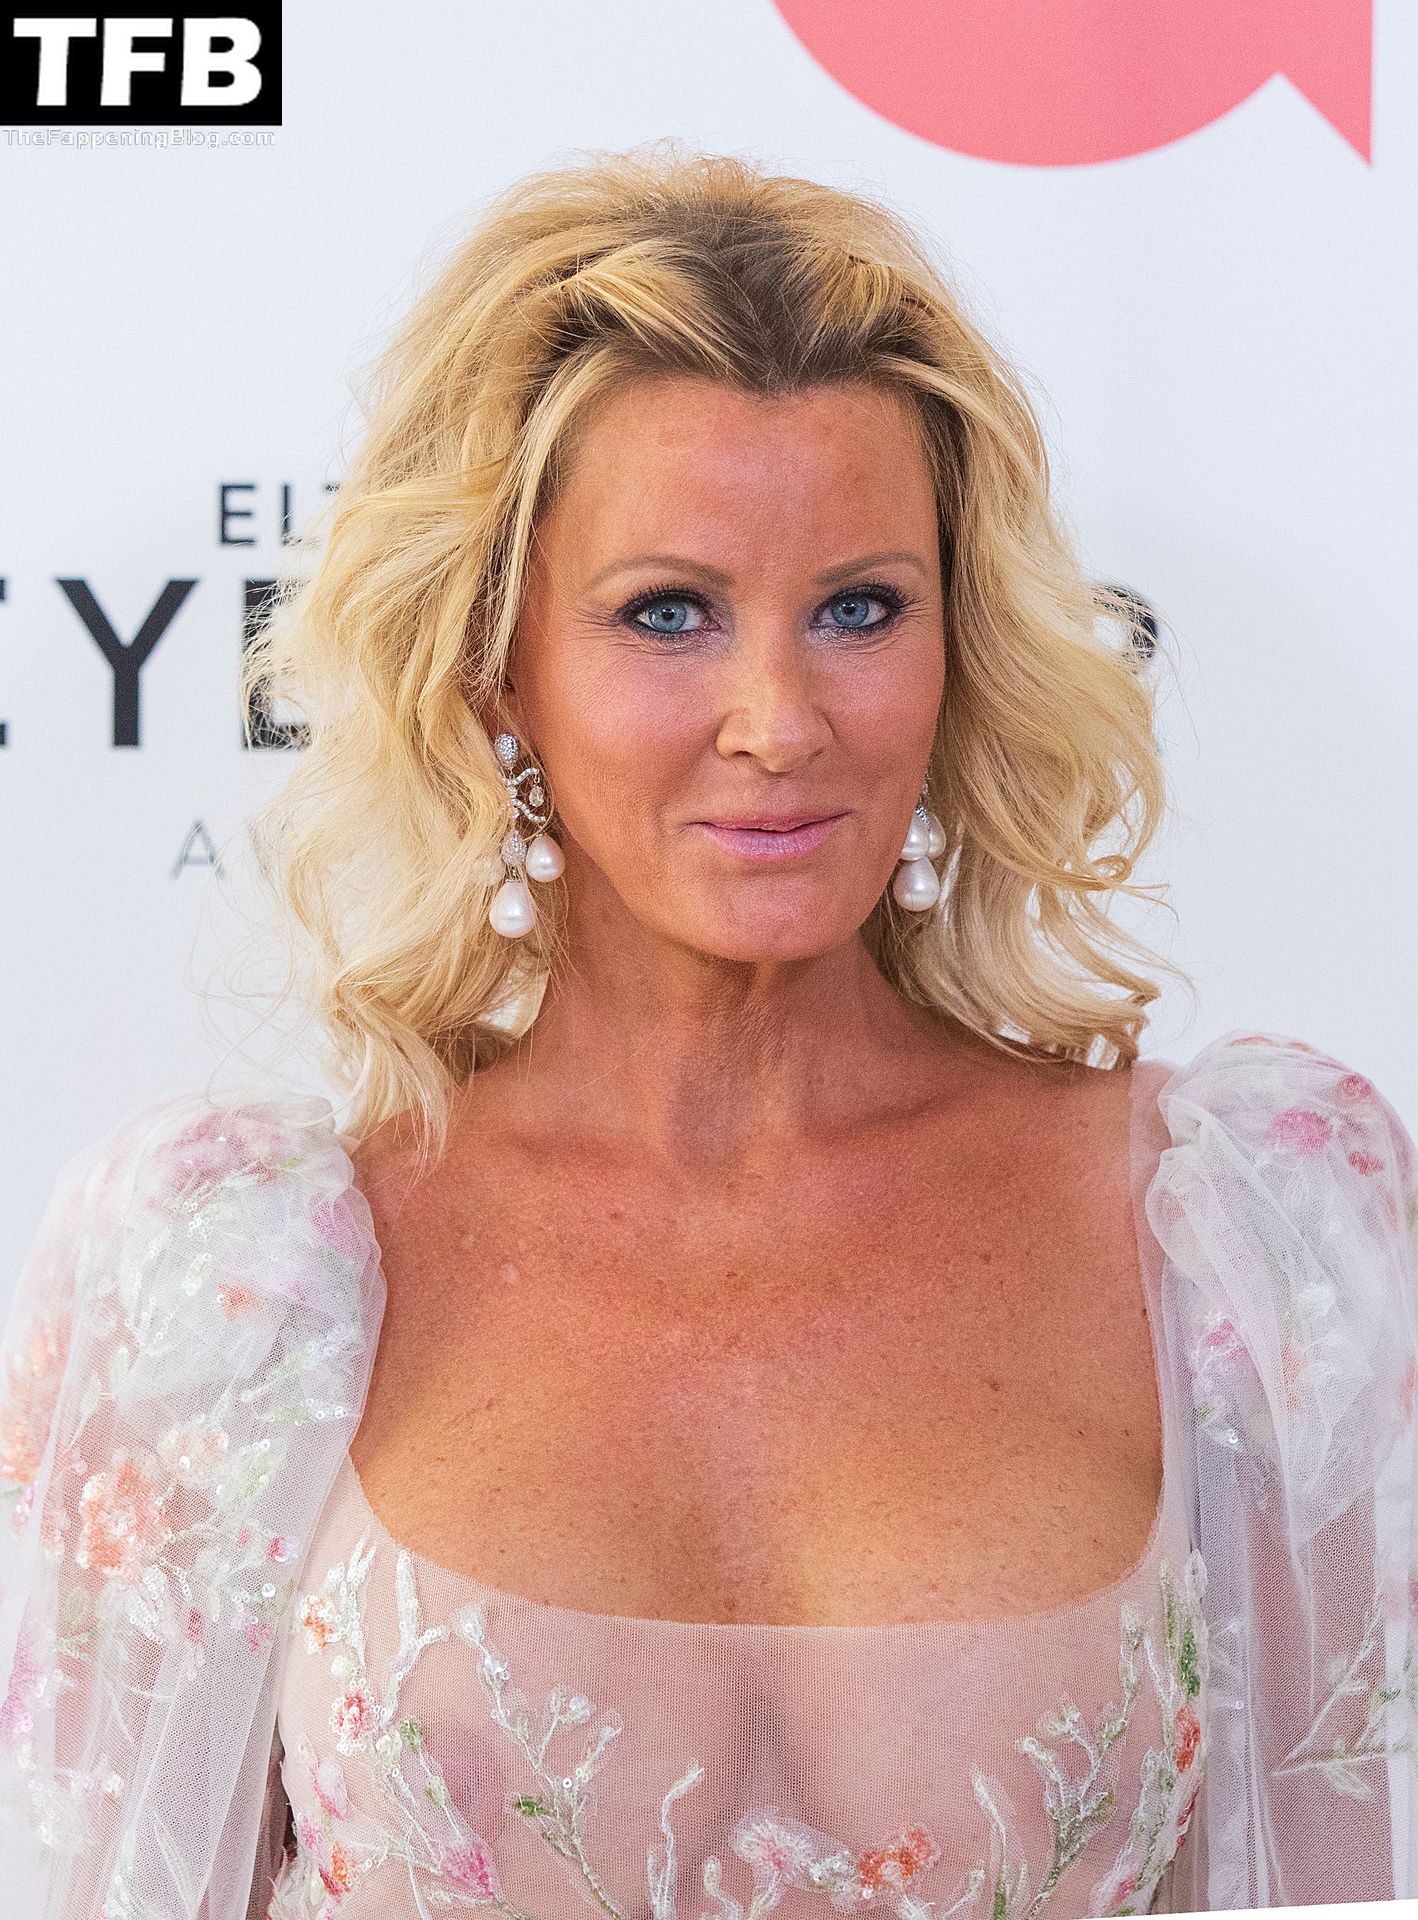 Sandra Lee Displays Her Nude Boobs At The 30th Annual Elton John Aids Foundation Academy Viewing